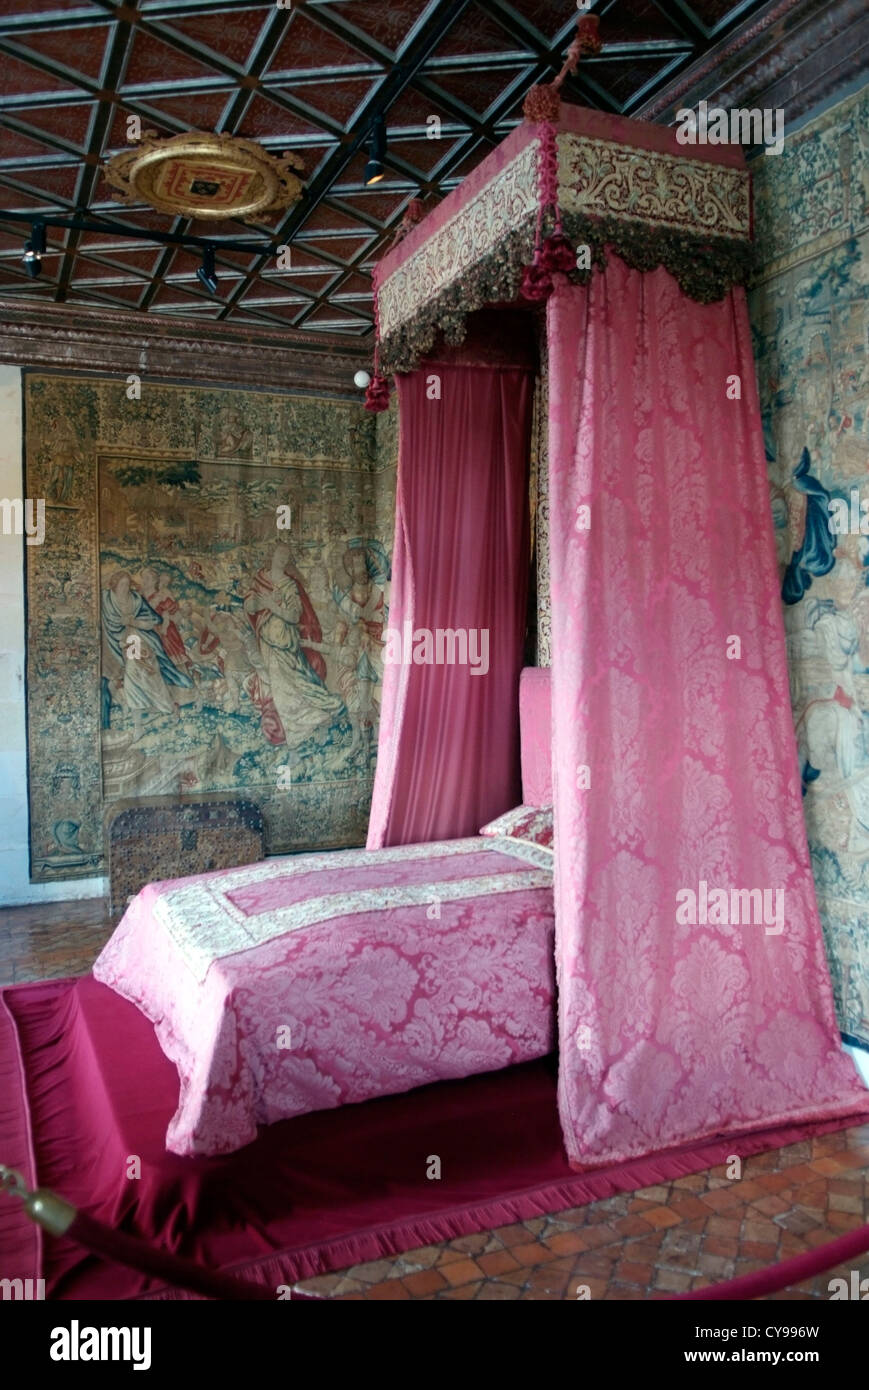 FRANCE Château de Chenonceau is a manor house near the small village of Chenonceaux, Loire Valley. Five queens' bedroom. Stock Photo